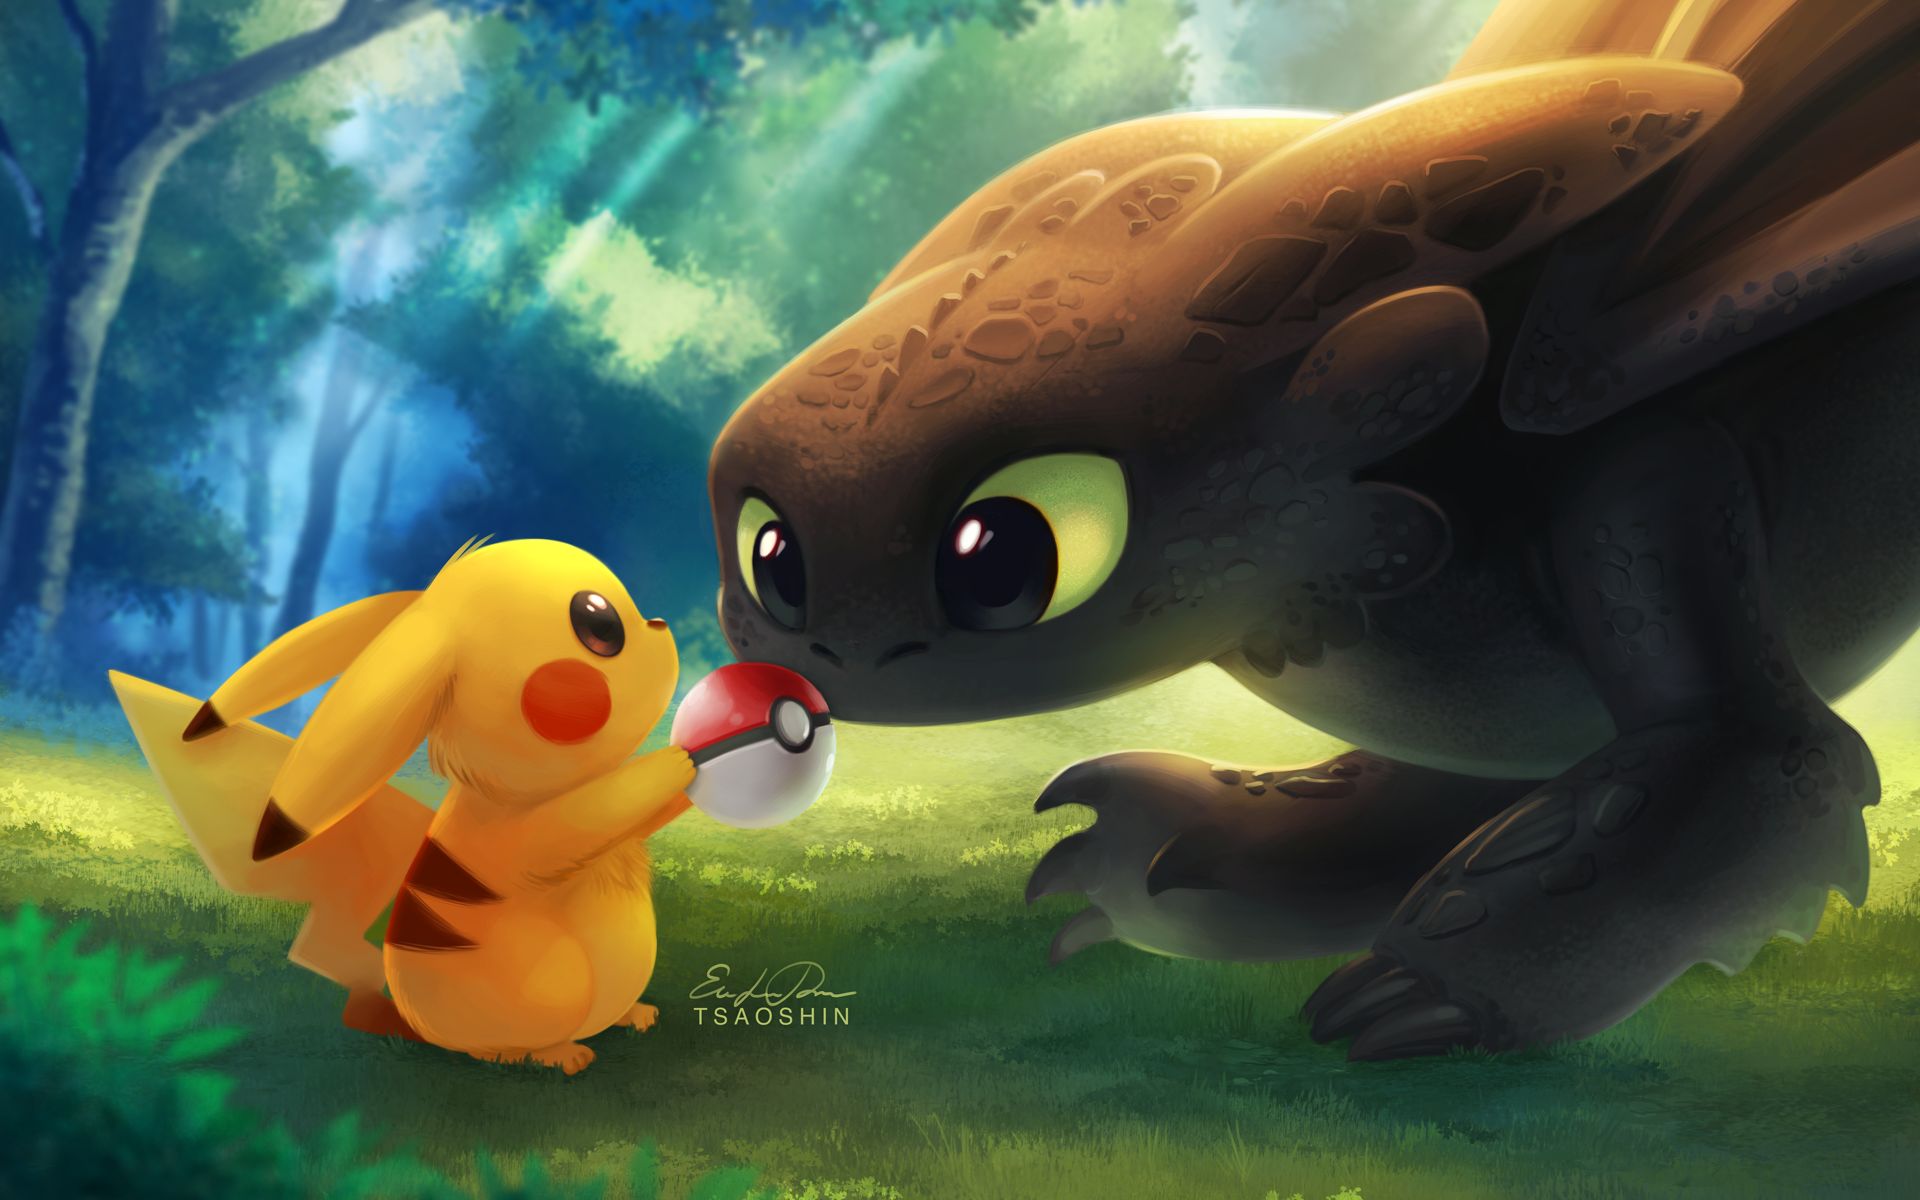 how to train your dragon, cute, movie, crossover, pikachu, pokeball, pokémon, toothless (how to train your dragon) cell phone wallpapers